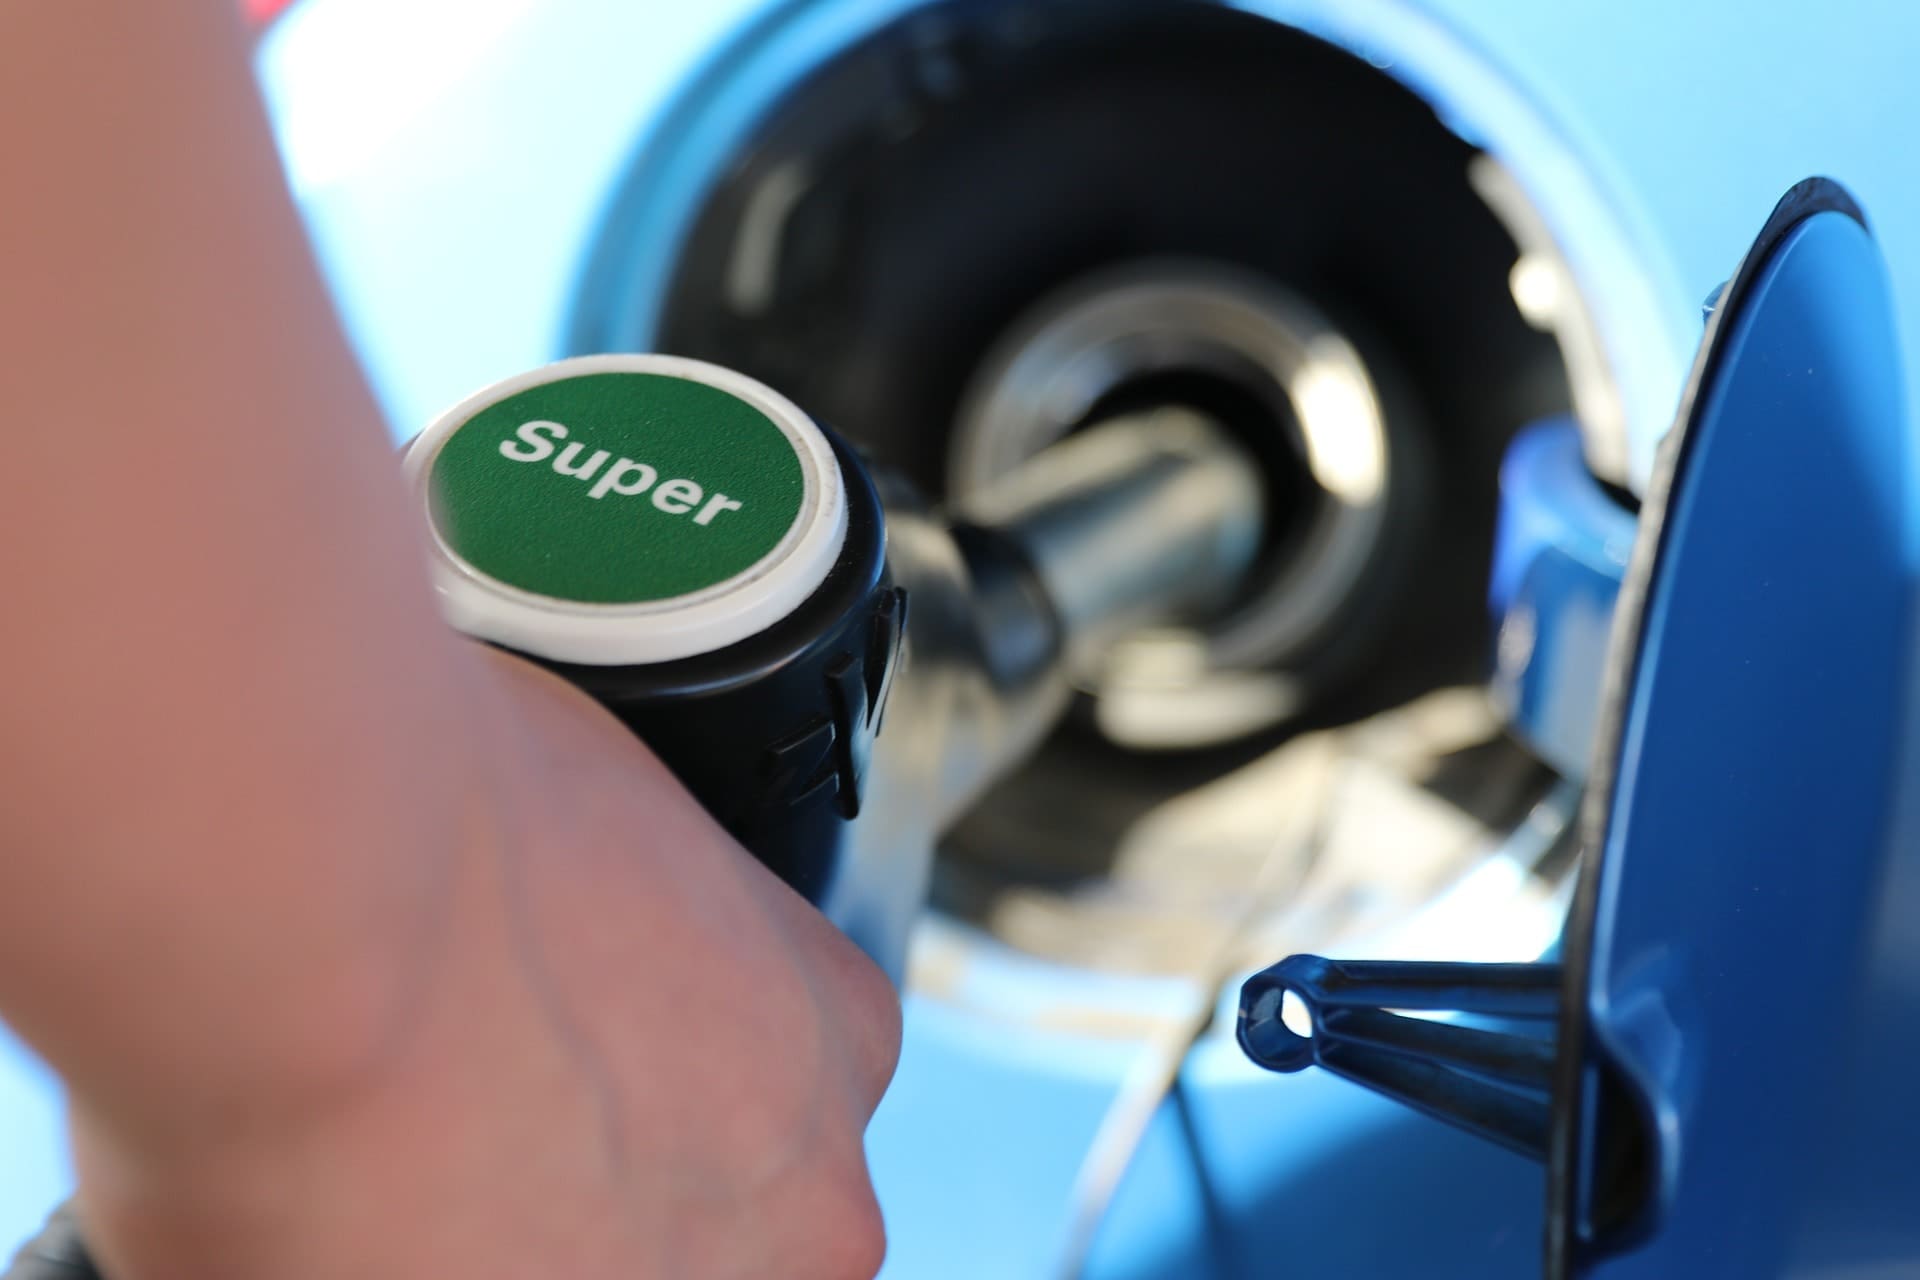 Gas pump handle with the word "Super" on it.